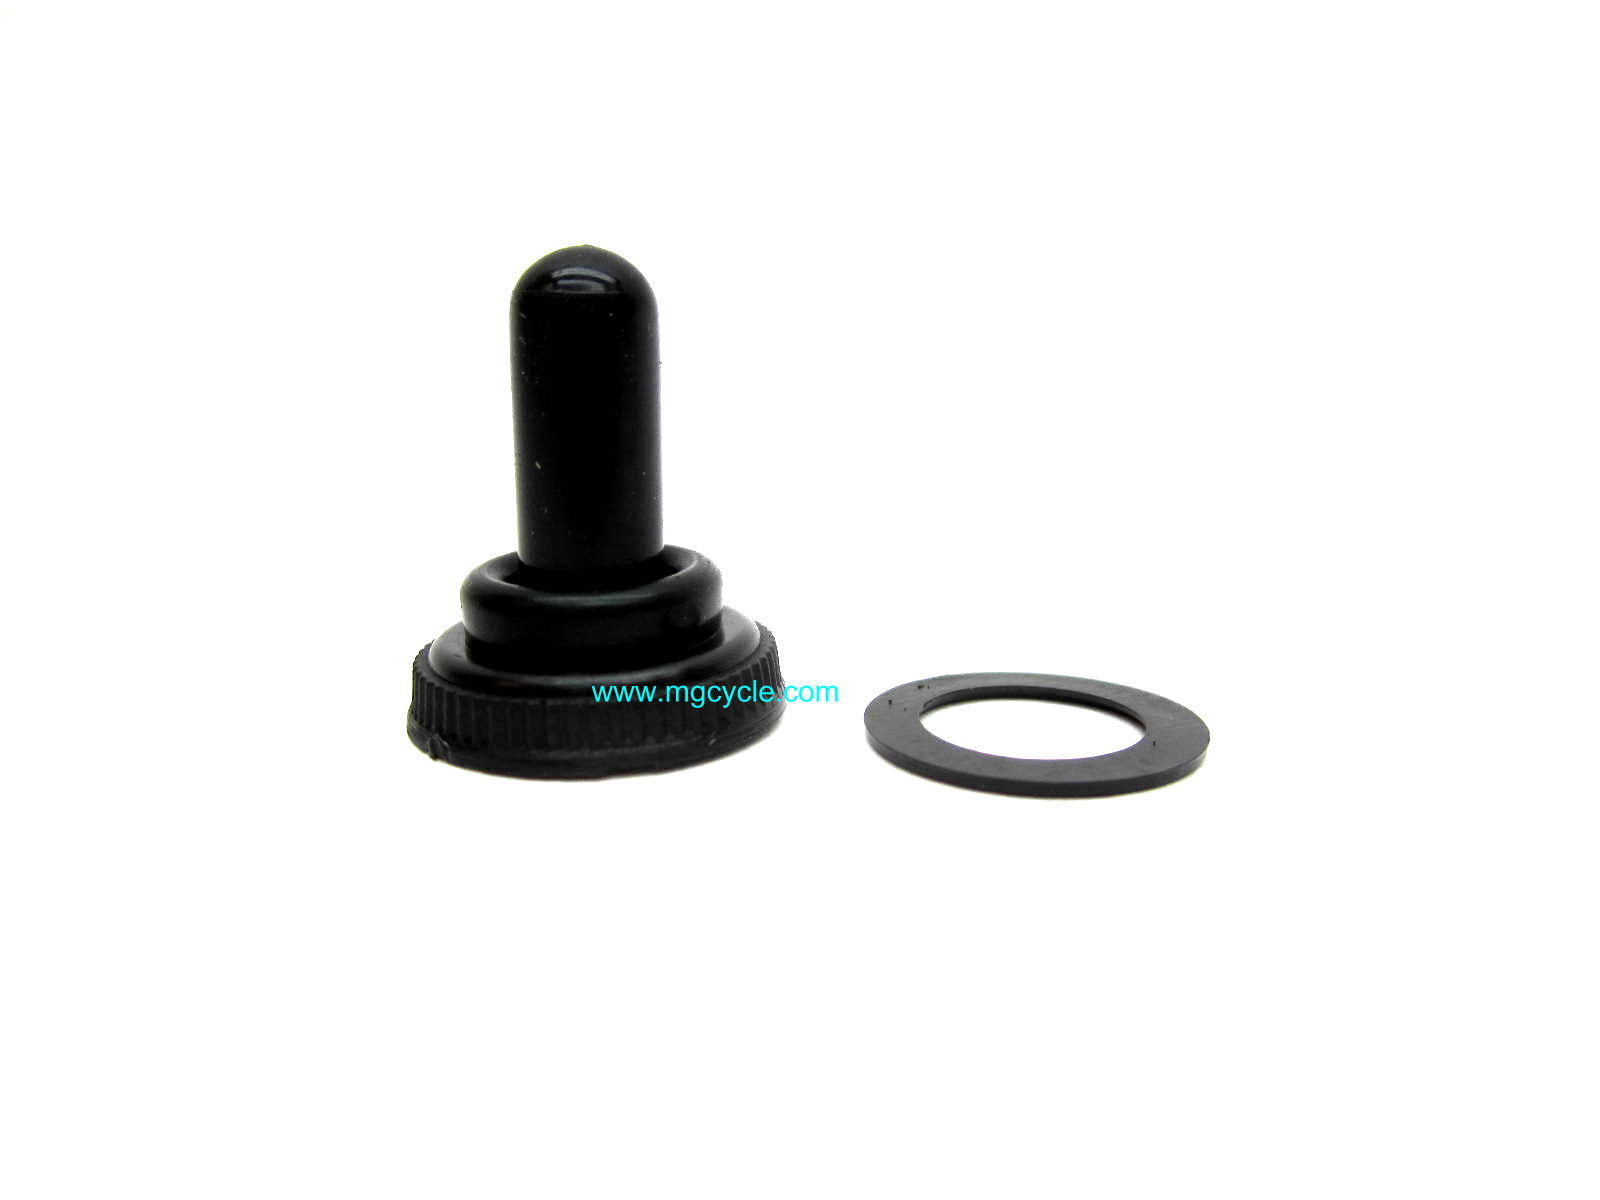 Rubber cap for toggle switch, Convert, G5, T3 Police instrument